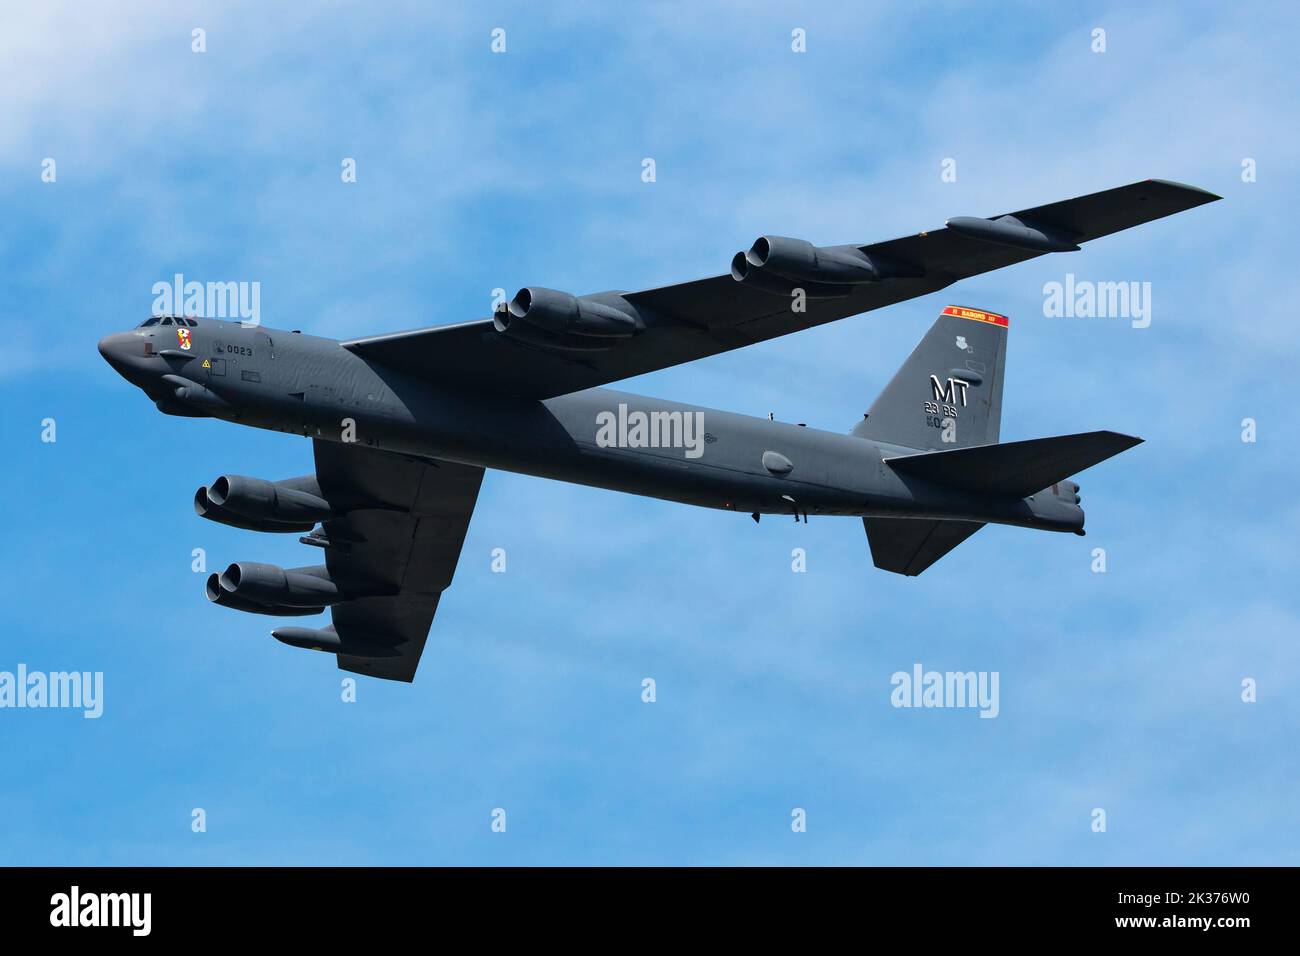 Zeltweg, Austria - September 3, 2022: US Air Force Boeing B-52 Stratofortress strategic bomber plane at air base. Military aircraft. Aviation industry Stock Photo